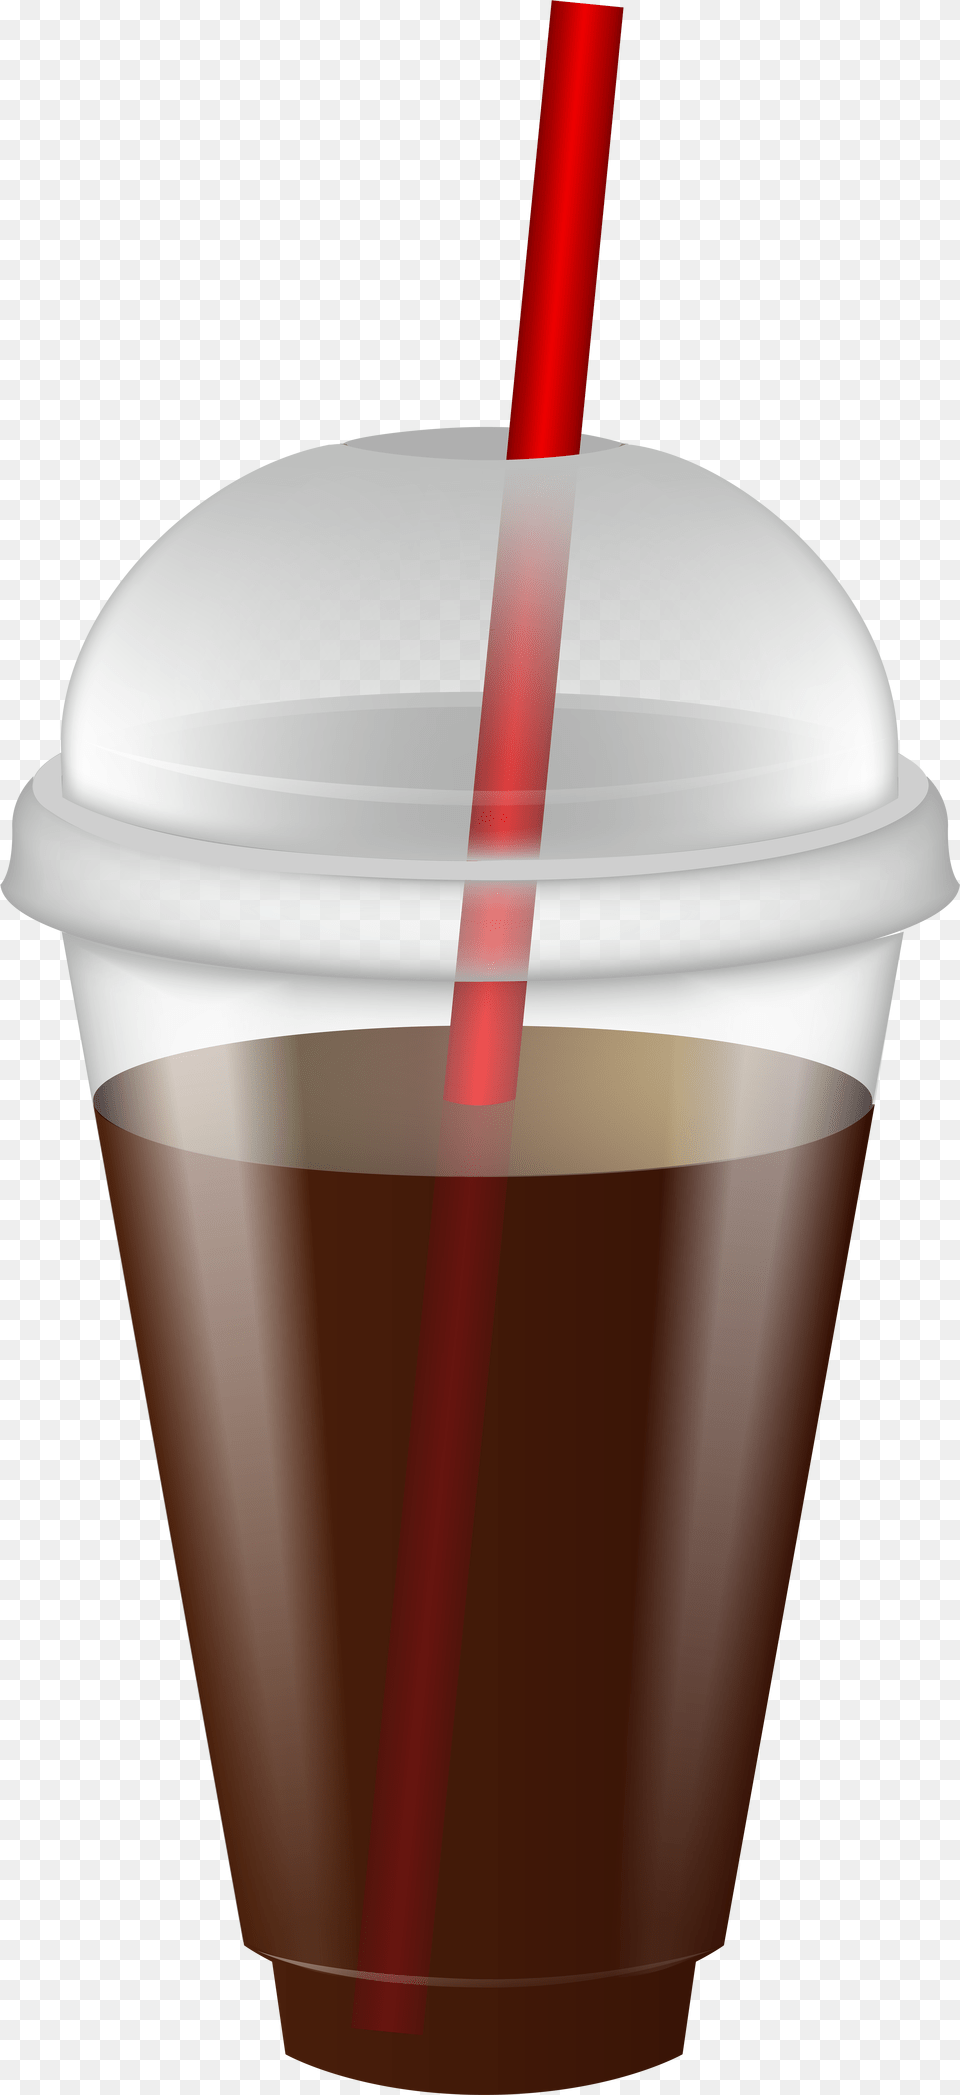 Cup Clipart Straw Drink Plastic Cup, Beverage, Bottle, Shaker Png